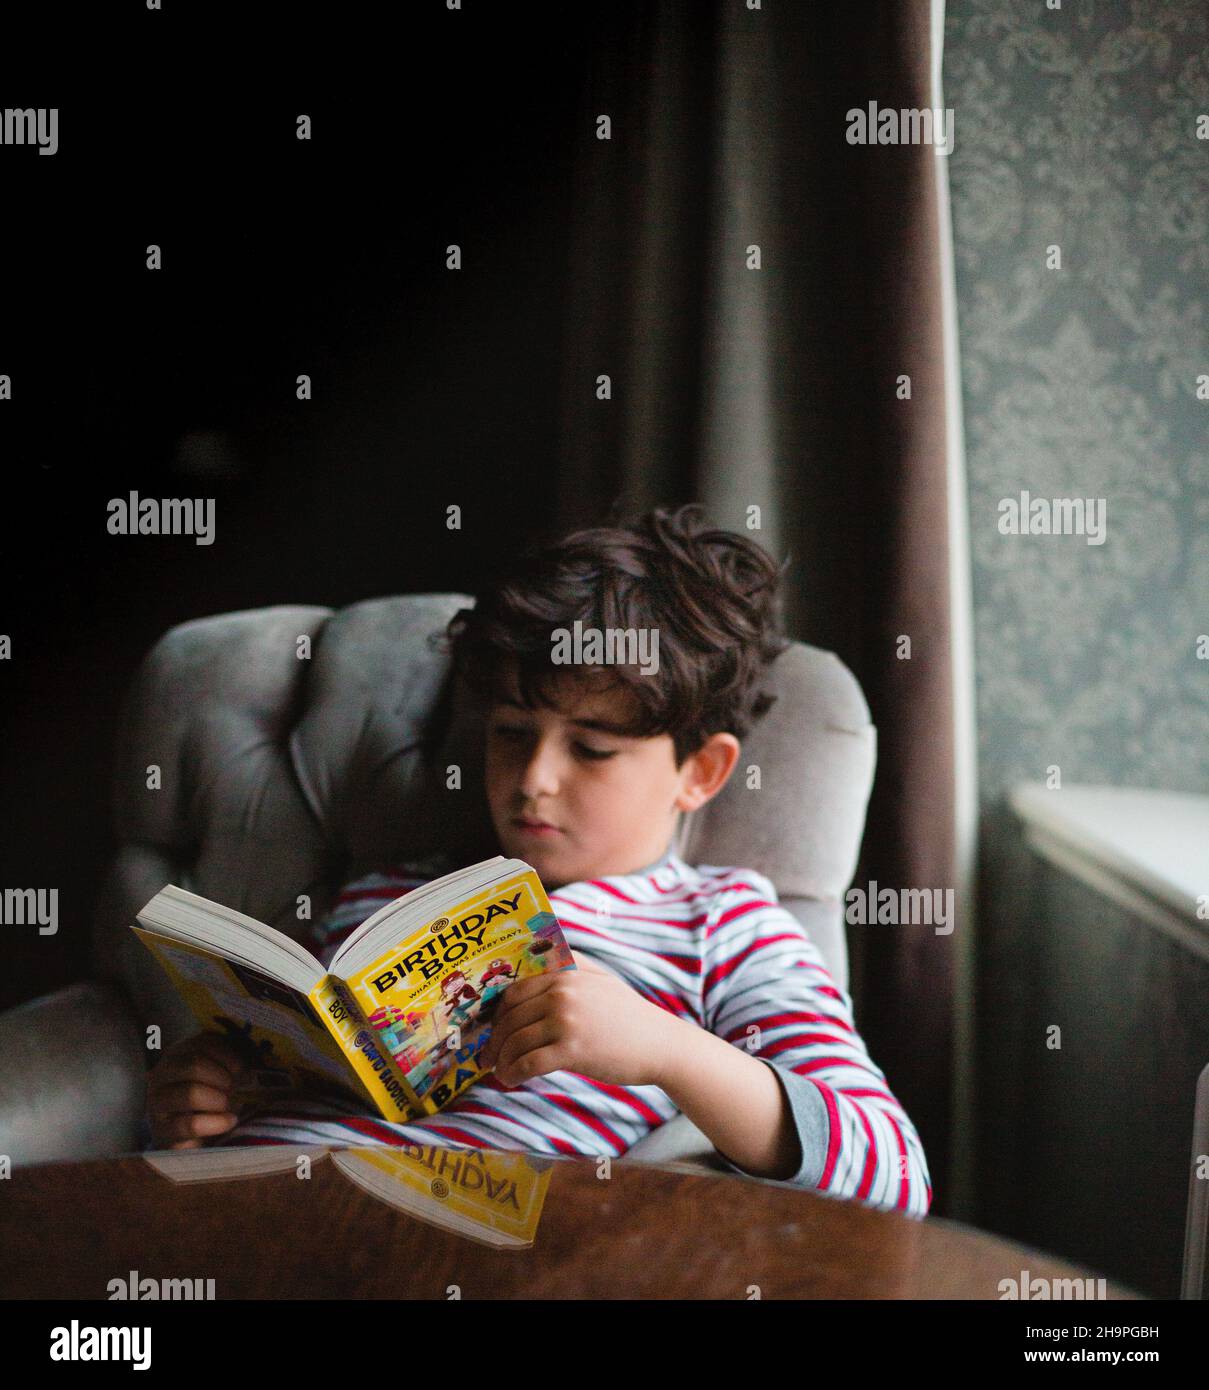 9 years old boy in pyjamas reading book on a chair next to a window Stock Photo